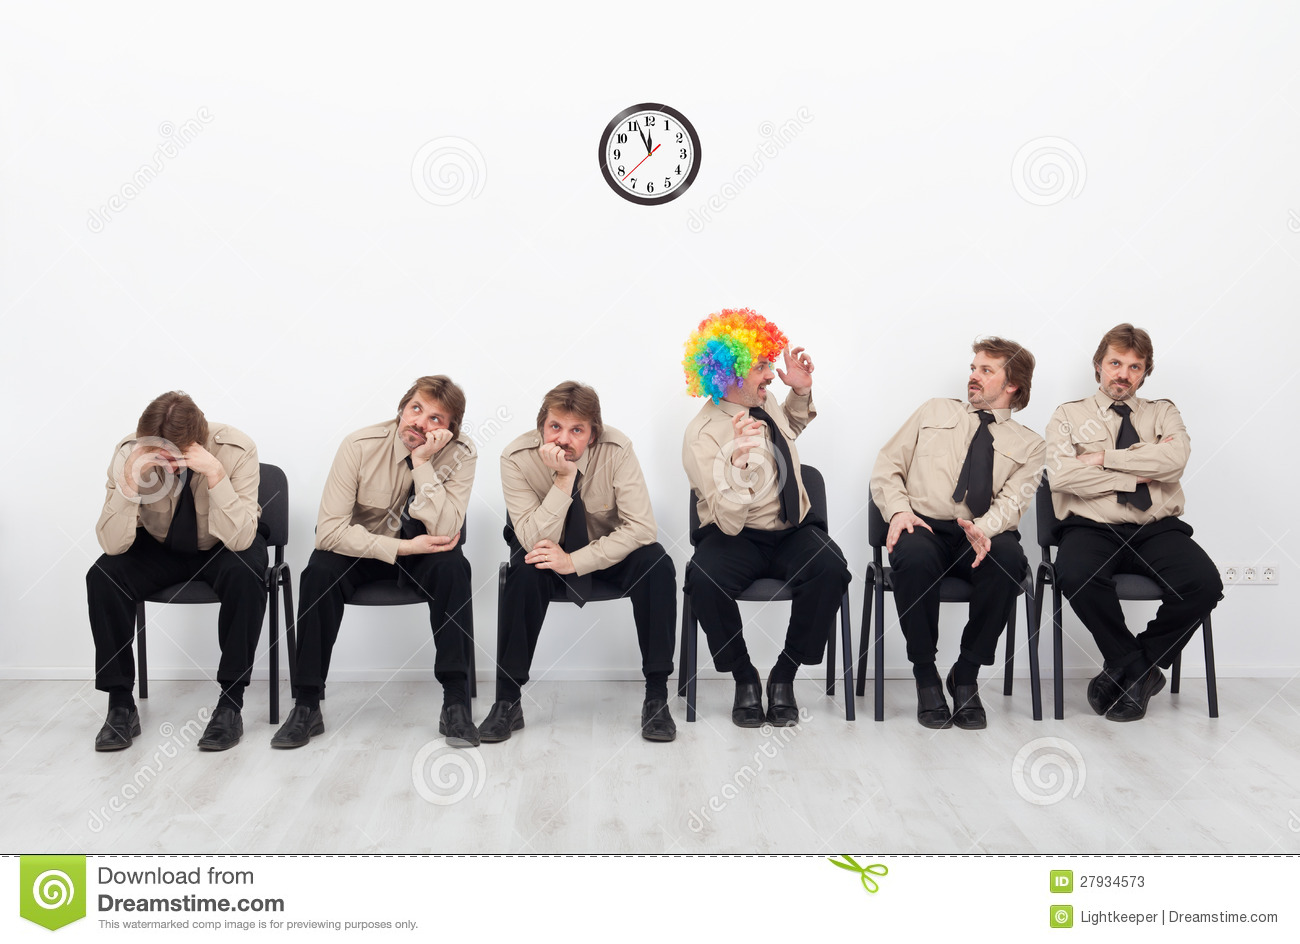 People Waiting for Job Interview